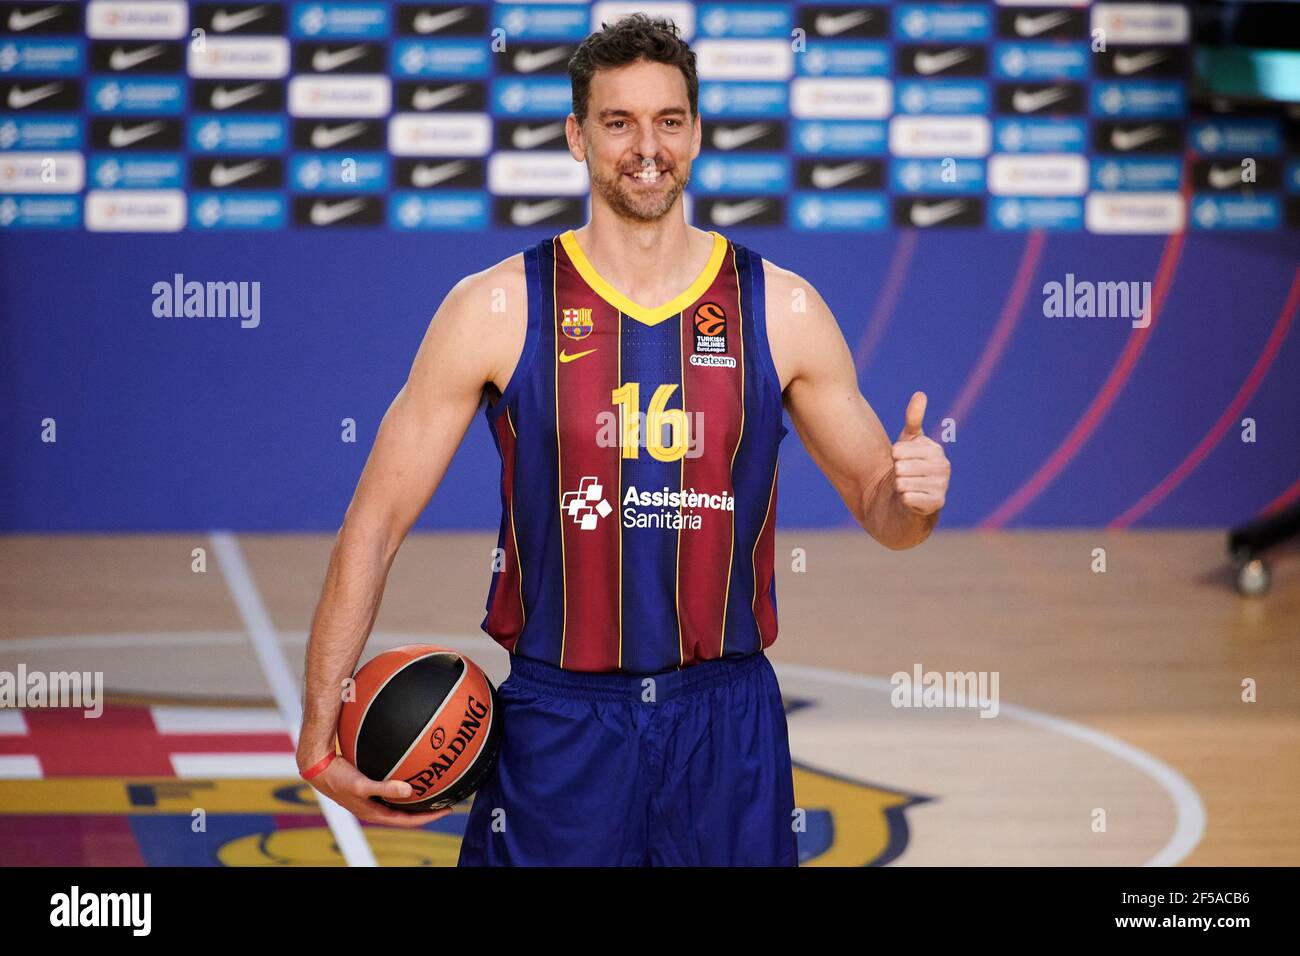 Barcelona, Spain. 25th Mar, 2021. Pau Gasol during his presentation as new  FC Barcelona Basketball player at Palau Blaugrana in Barcelona, Spain.  Credit: DAX Images/Alamy Live News Stock Photo - Alamy